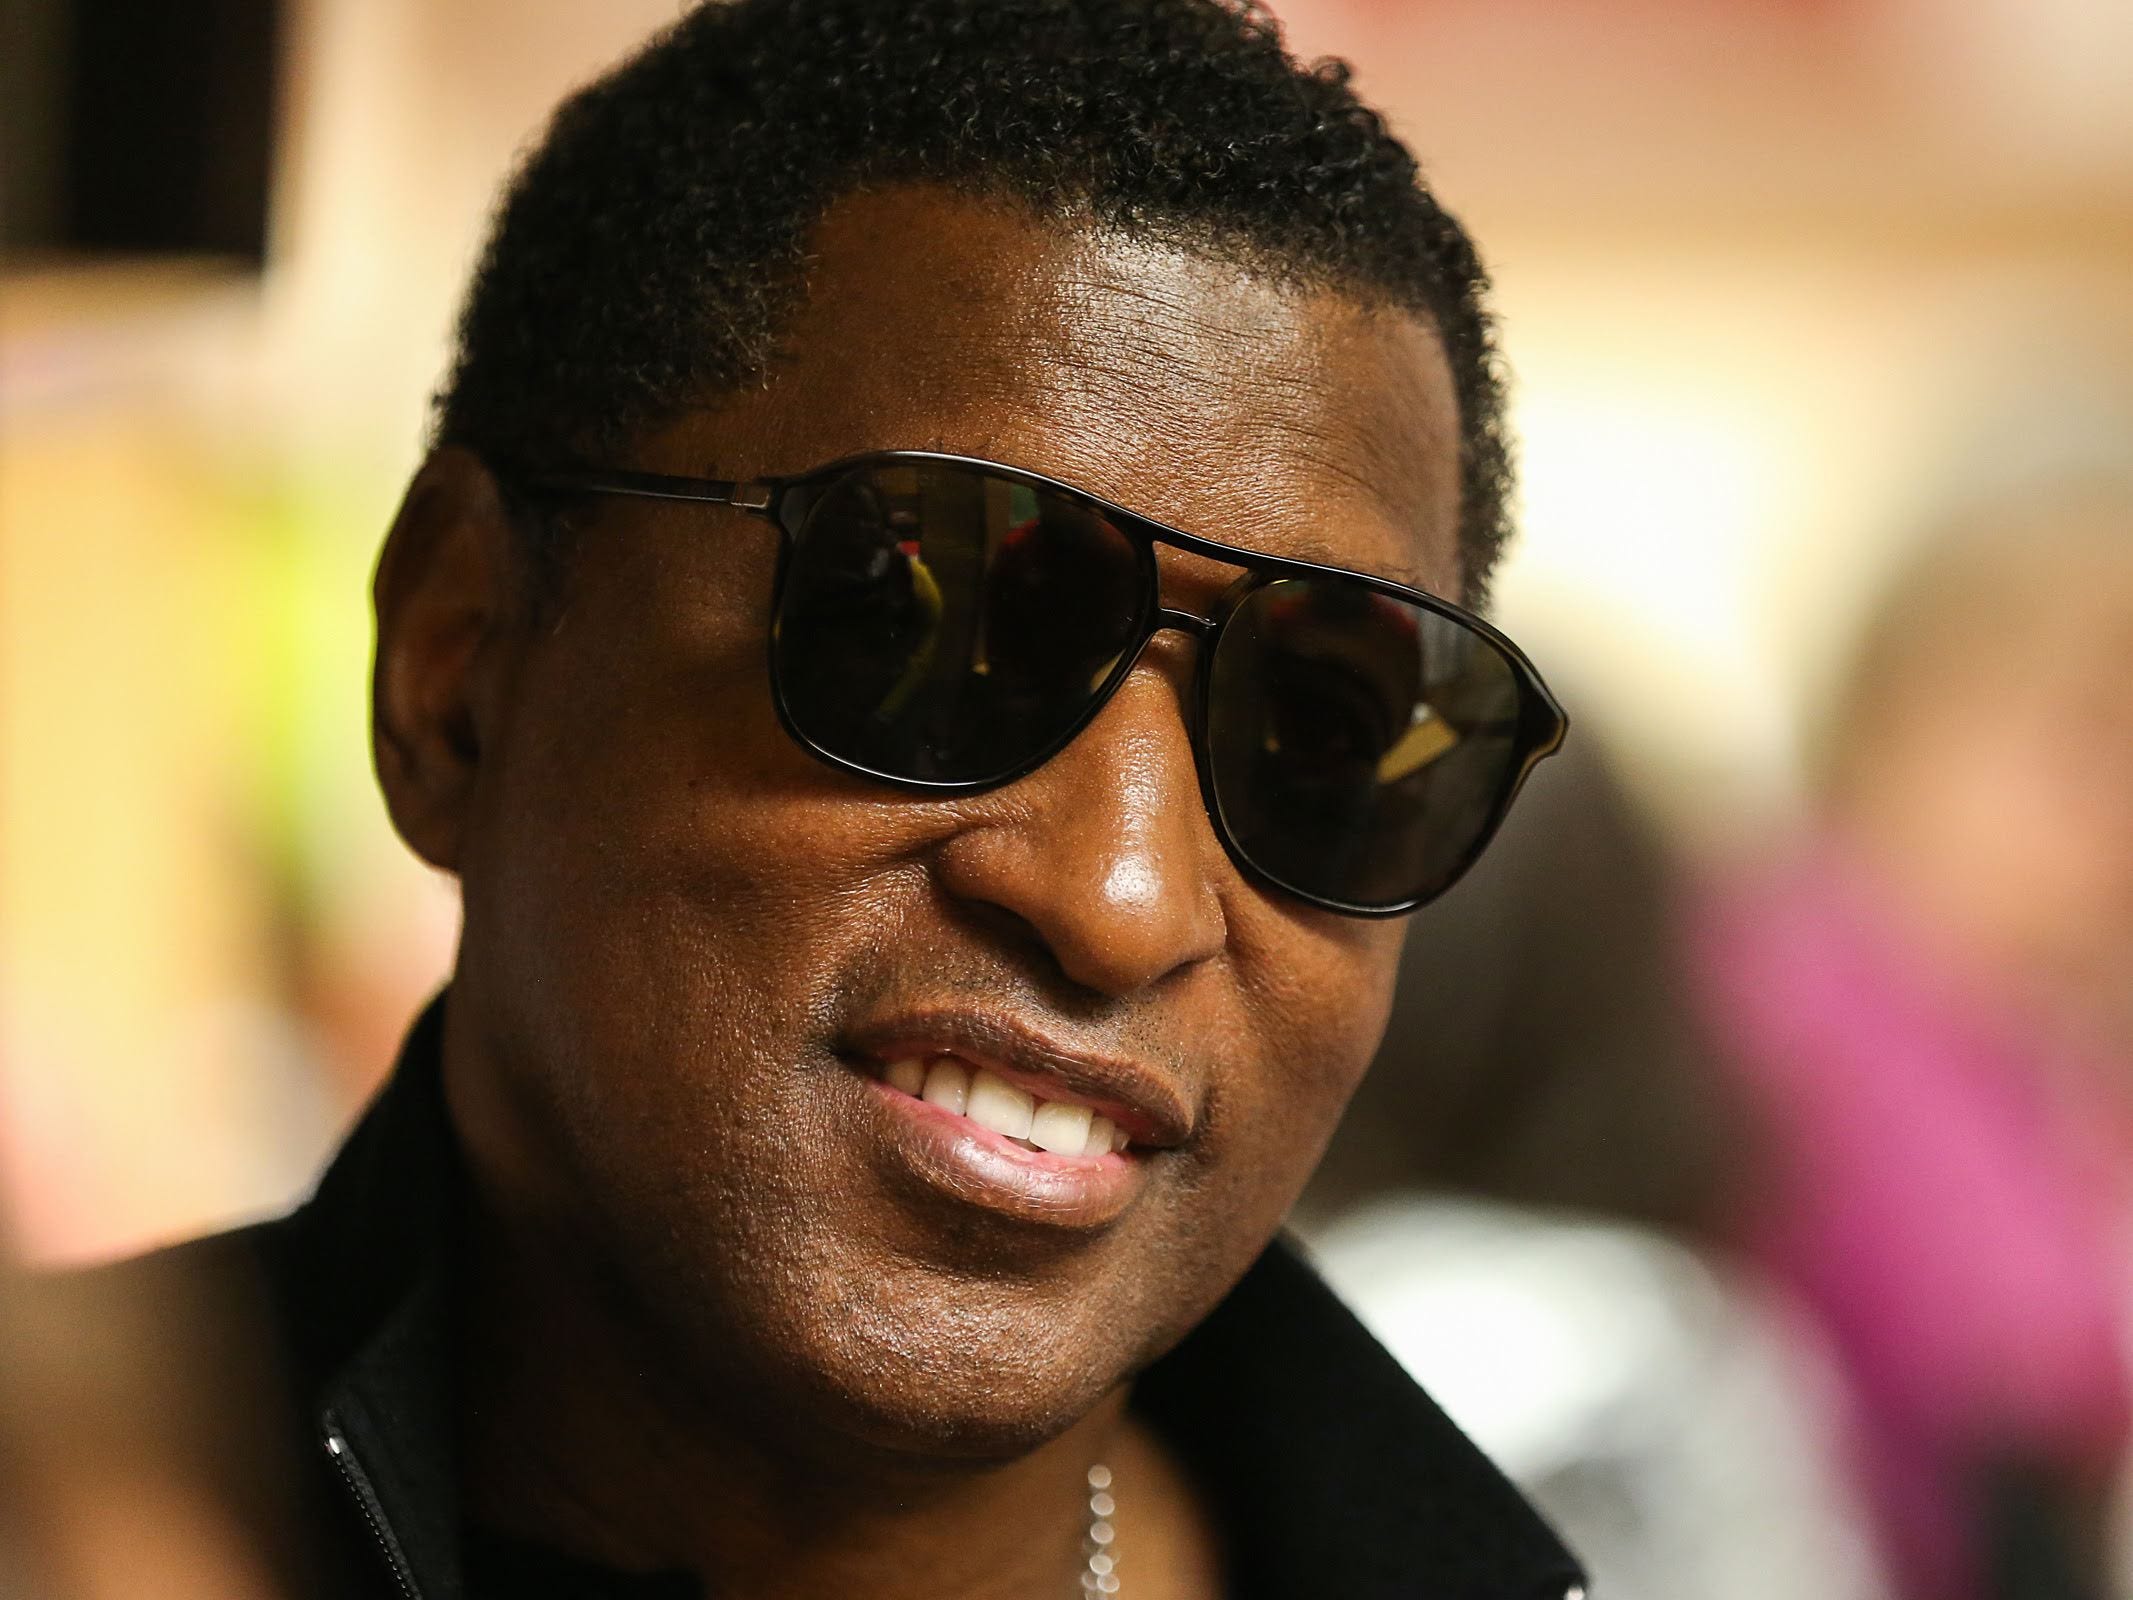 babyface songs for other artists